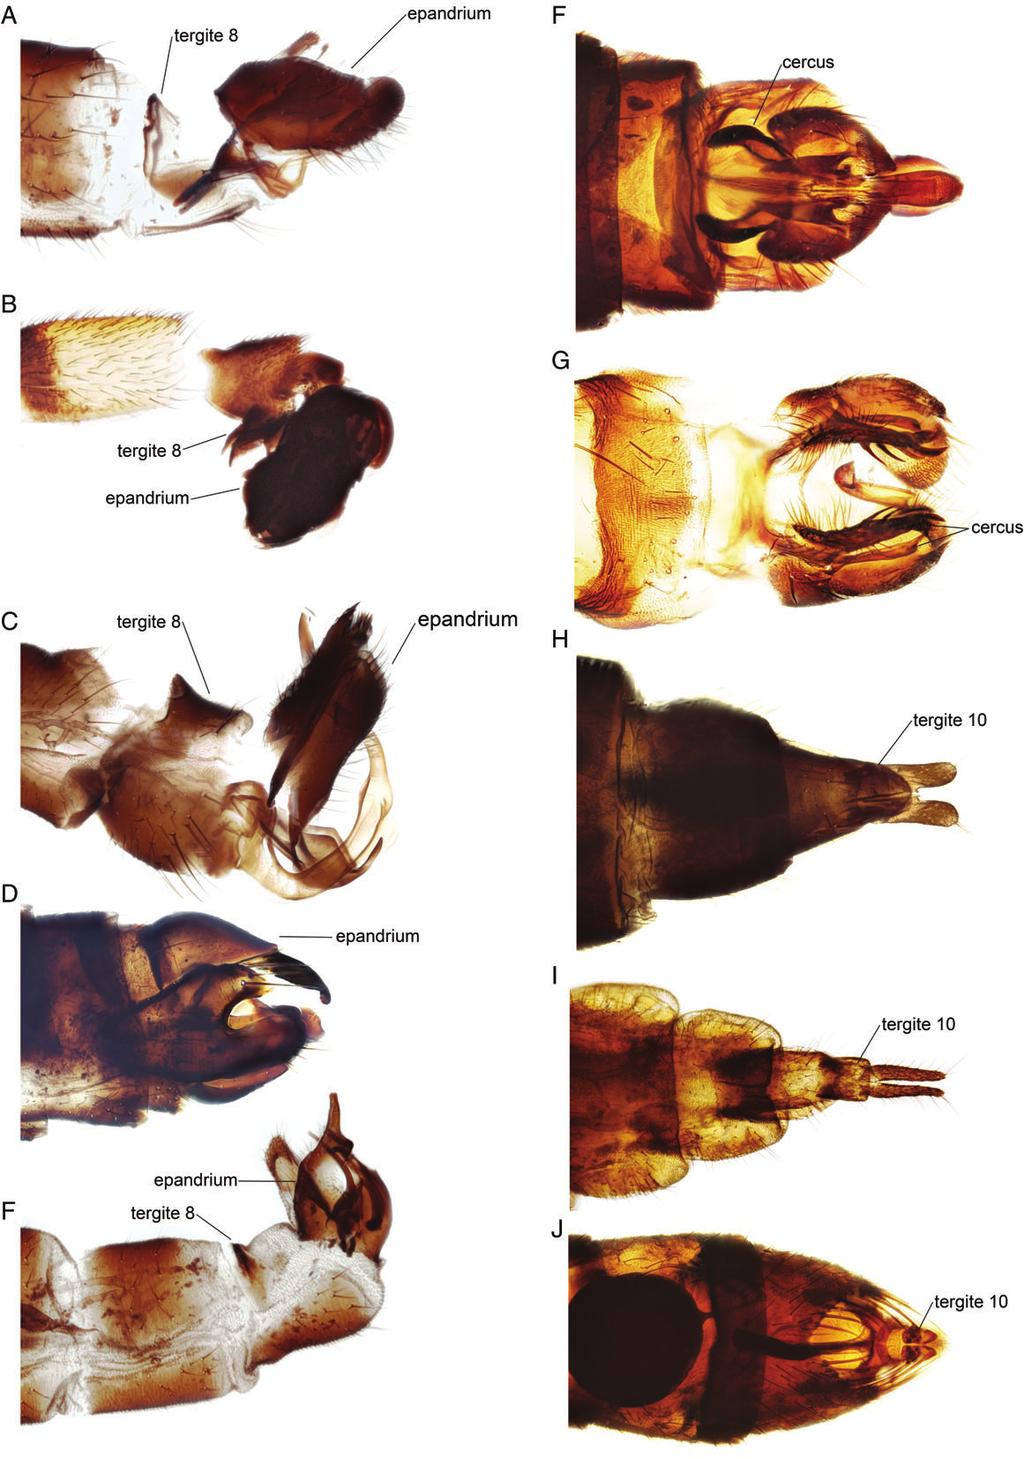 10 E. Wahlberg and K. A. Johanson Fig. 5. Pictures of posterior part of abdomen.